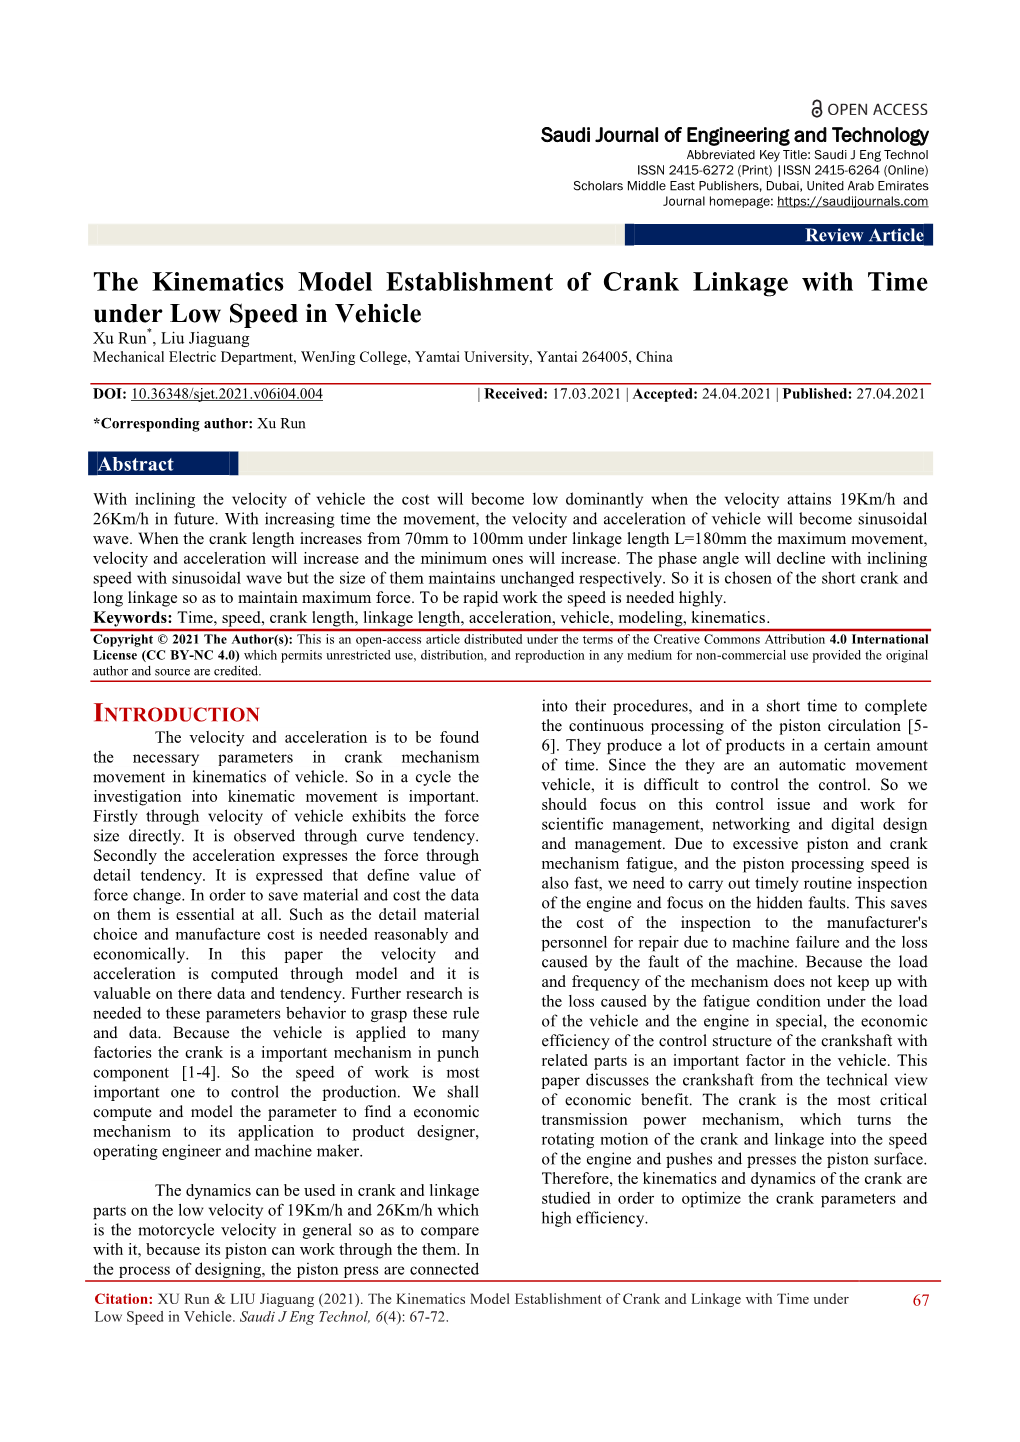 The Kinematics Model Establishment of Crank Linkage with Time Under